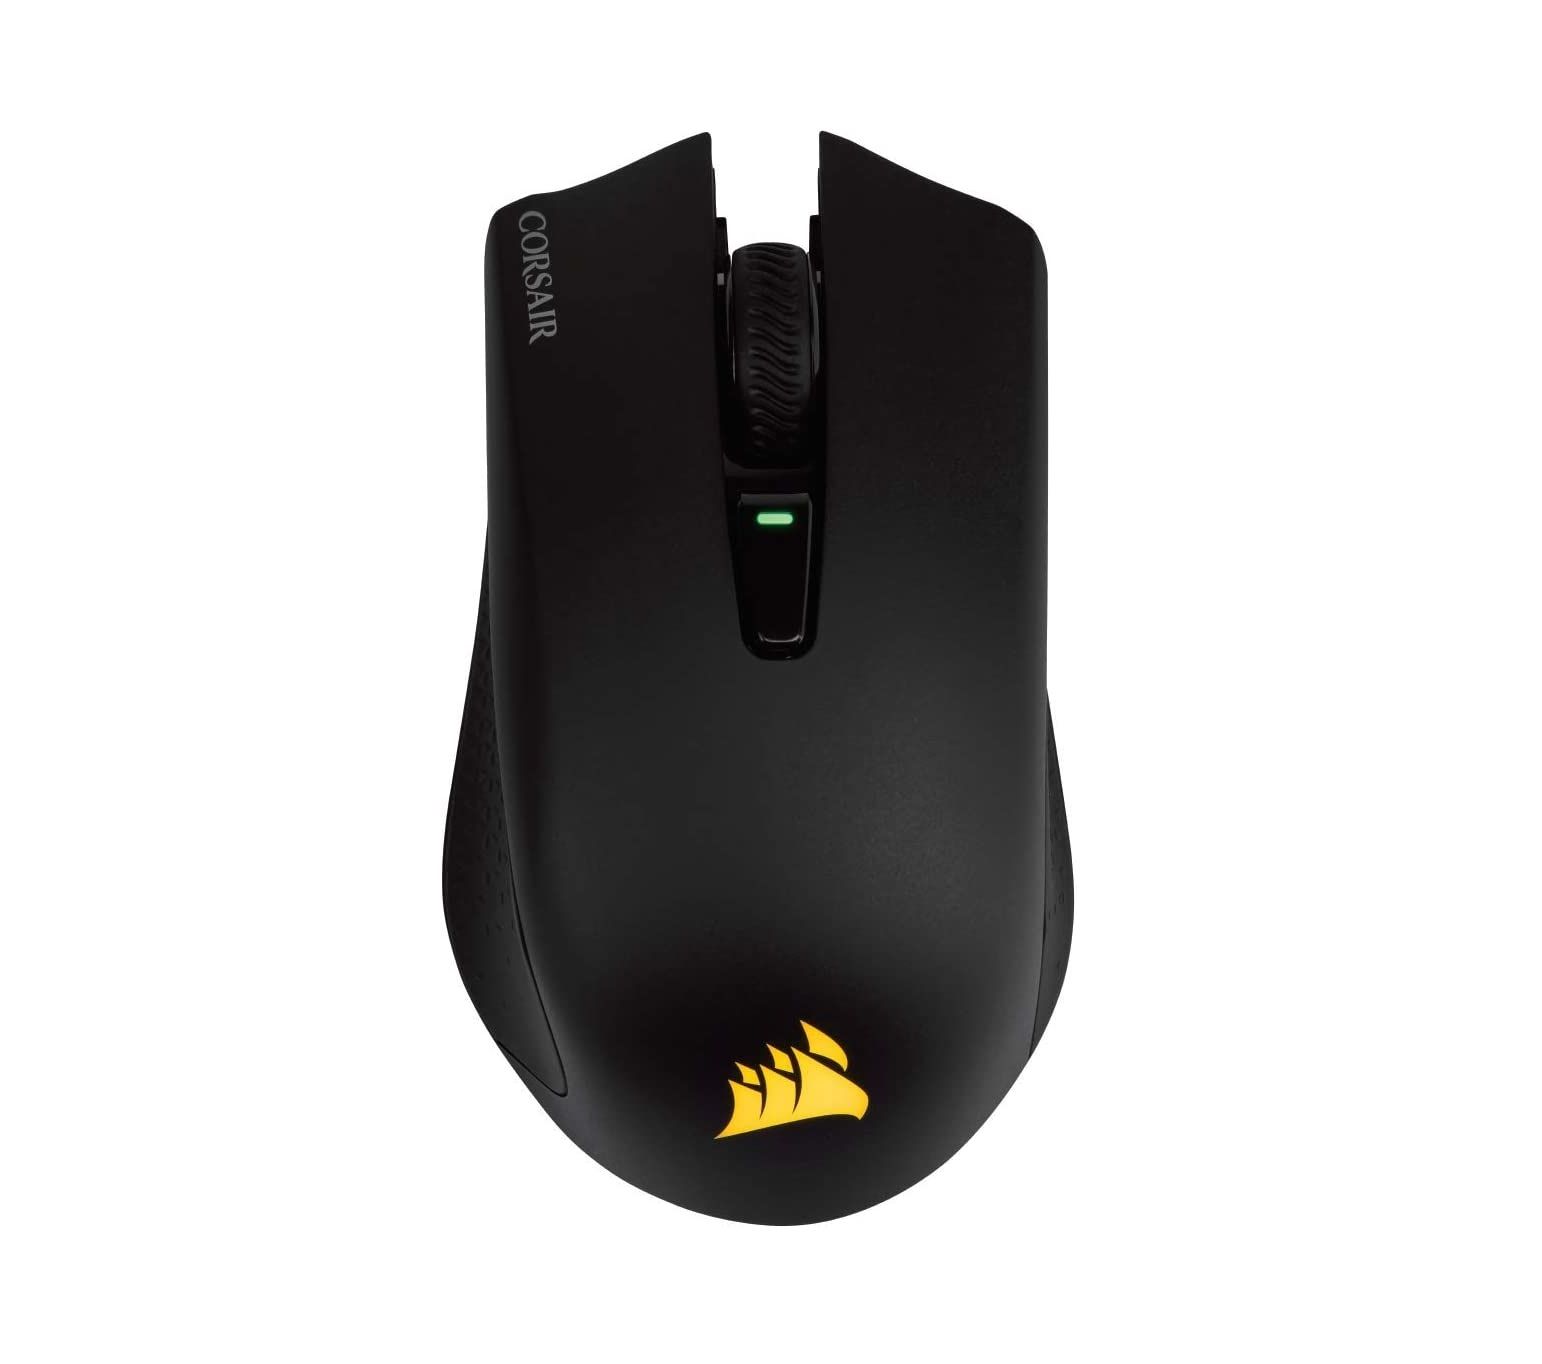 the corsair harpoon rgb wireless gaming mouse viewed from above